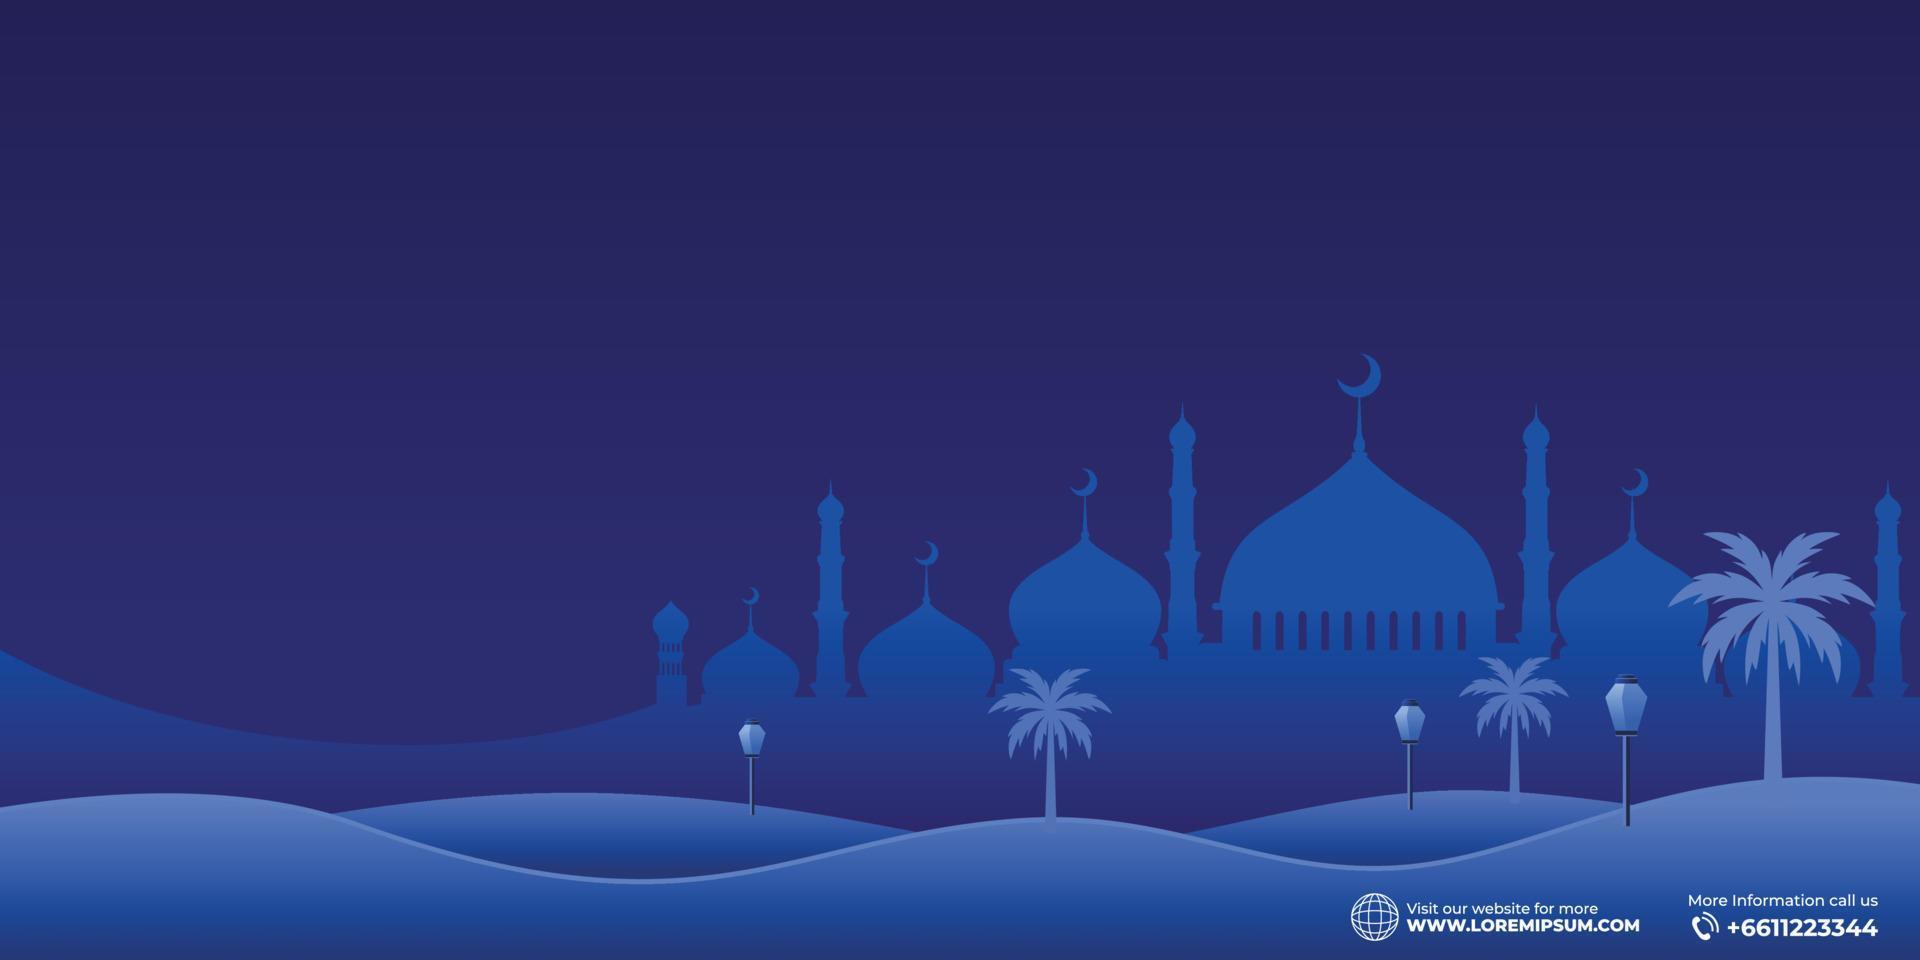 Ramadan Kareem Islamic Background vector. Happy Islamic New Hijri Year. Graphic design for the decoration of gift certificates, banners and flyer. vector